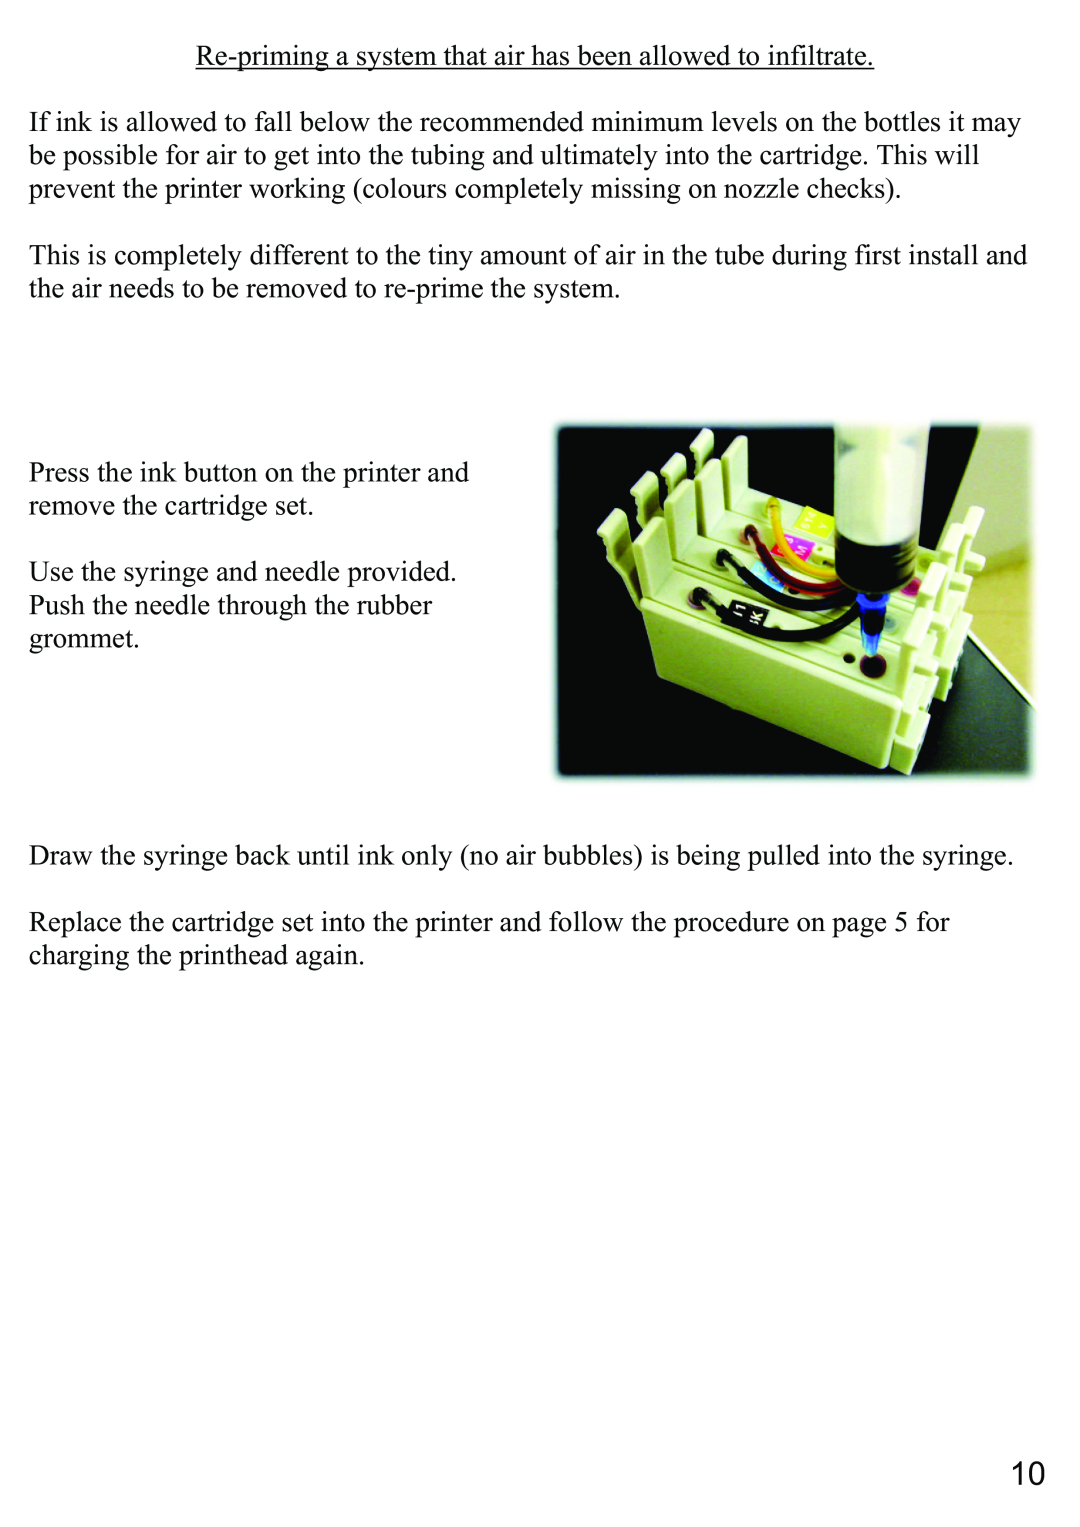 Epson D88 instruction manual Re-priming a system that air has been allowed to infiltrate 